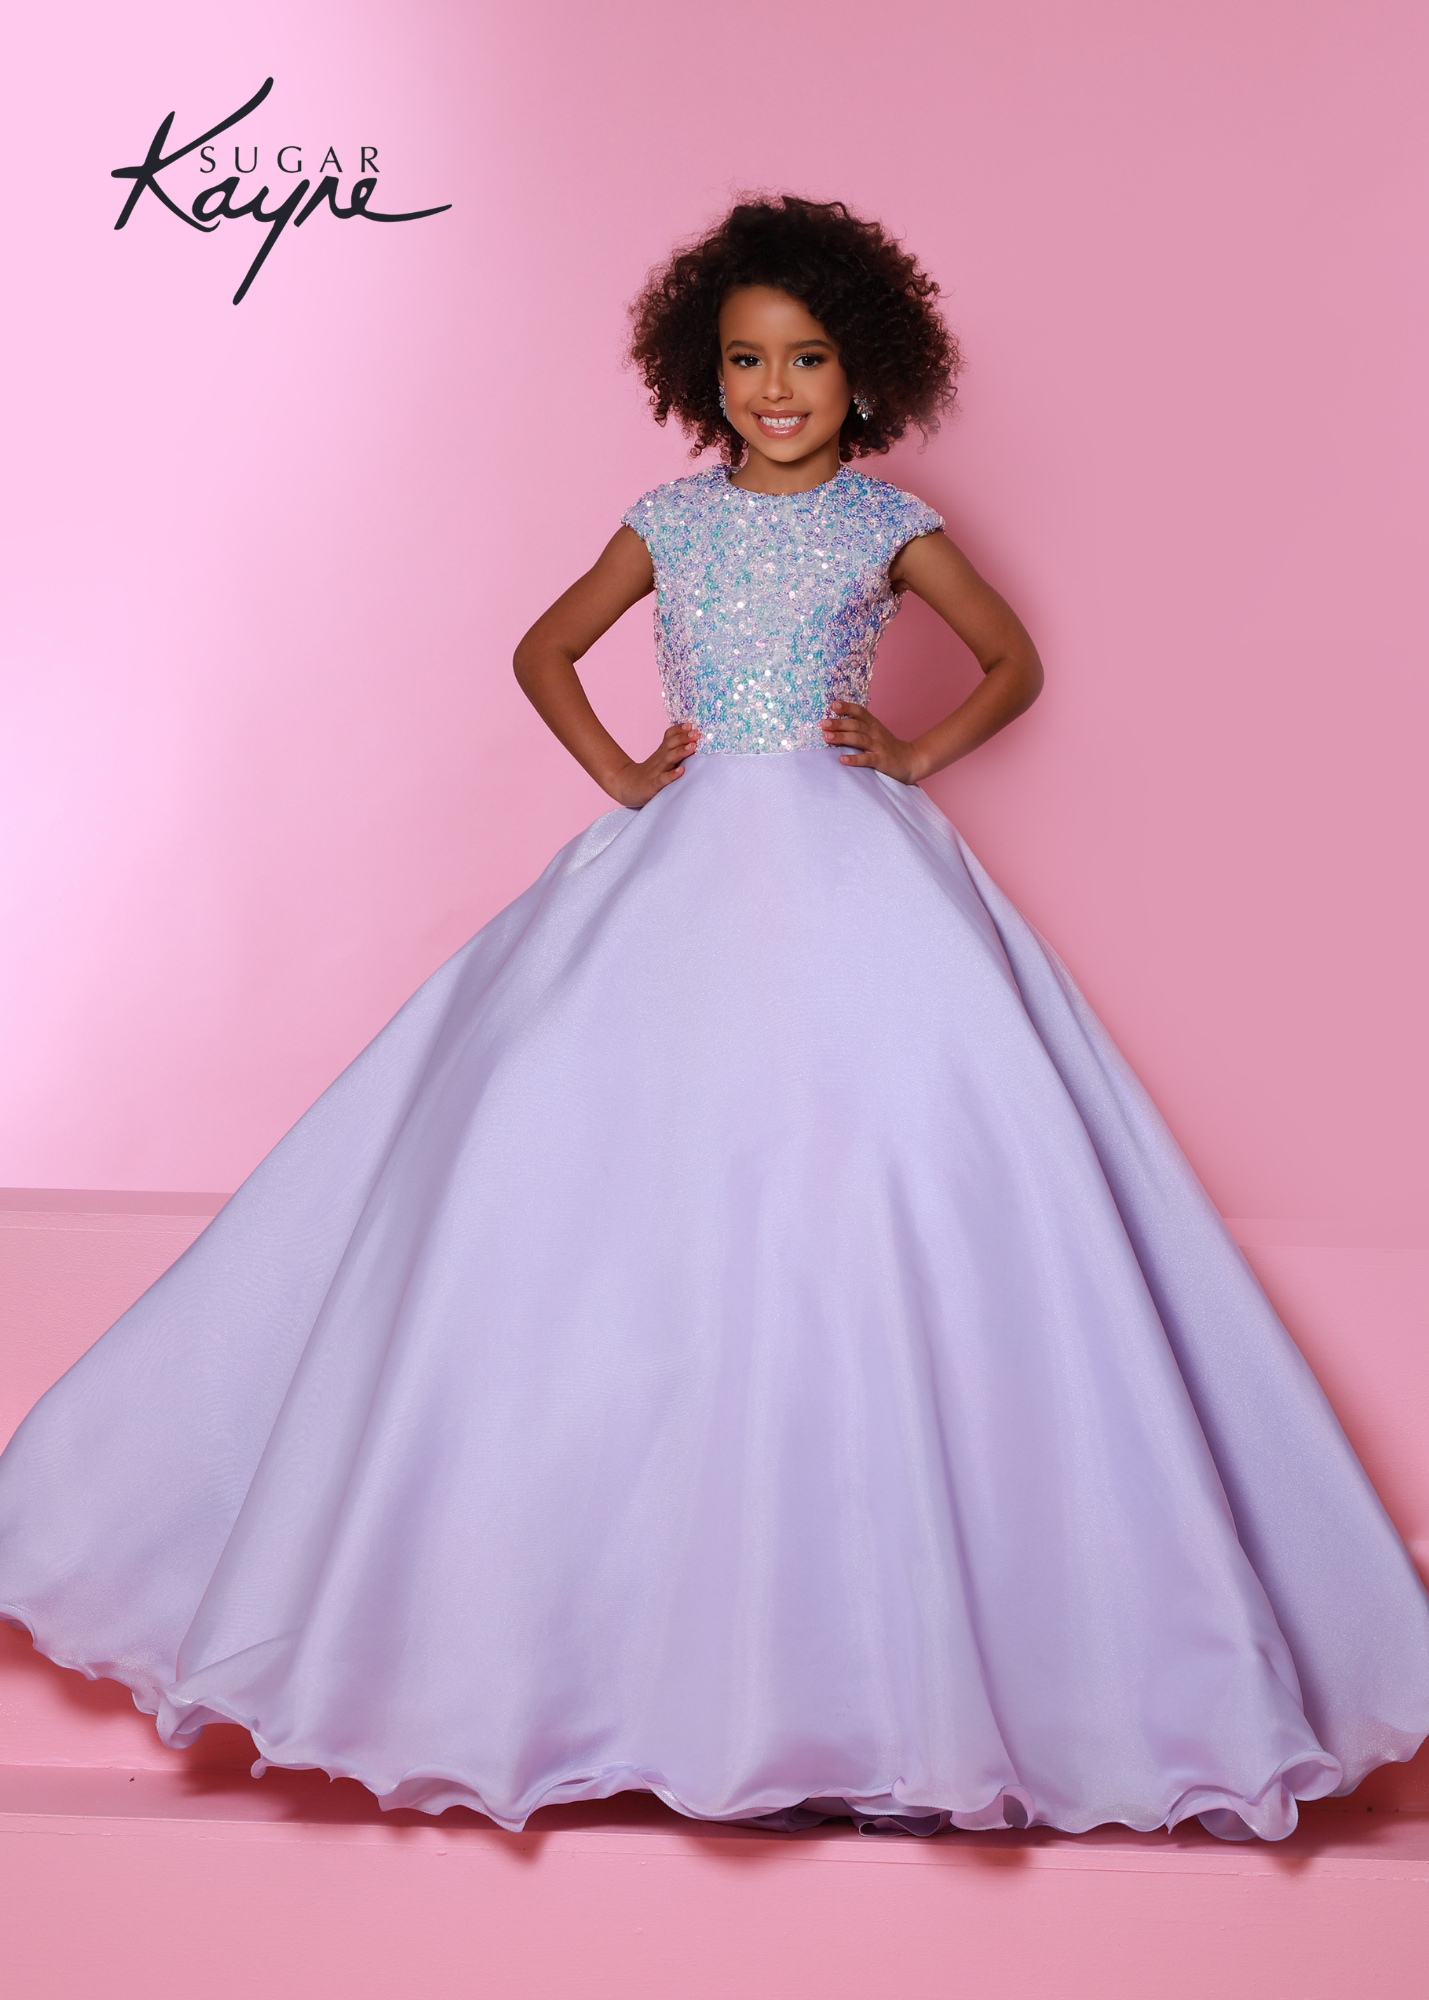 Sugar Kayne C308 Girls Long Sequin Ballgown Backless Pageant Dress High Neck Gown Cap Sleeve Product Details Brillant. Bold. Unforgettable. Be unforgettable at your next pageant in this sequin mesh bodice and shimmer chiffon skirt. The adorable keyhole back makes this look complete!  Color Aqua, Bubblegum, Lilac, White  Size 2, 4, 6, 8, 10, 12, 14, 16  Fabric Sequin Mesh, Stretch Lining, Shimmer Chiffon